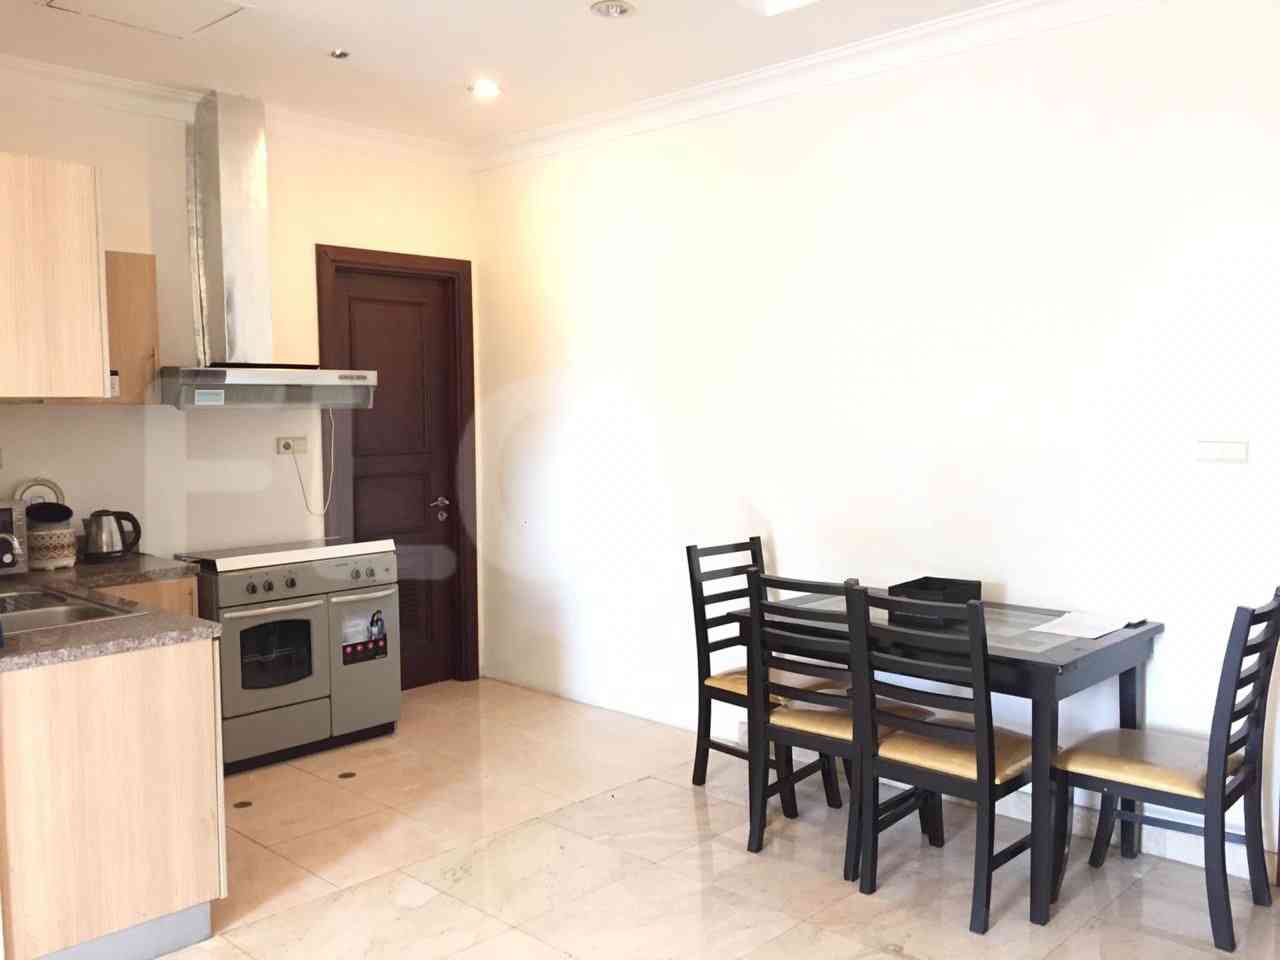 2 Bedroom on 18th Floor for Rent in Bellezza Apartment - fpe84b 4